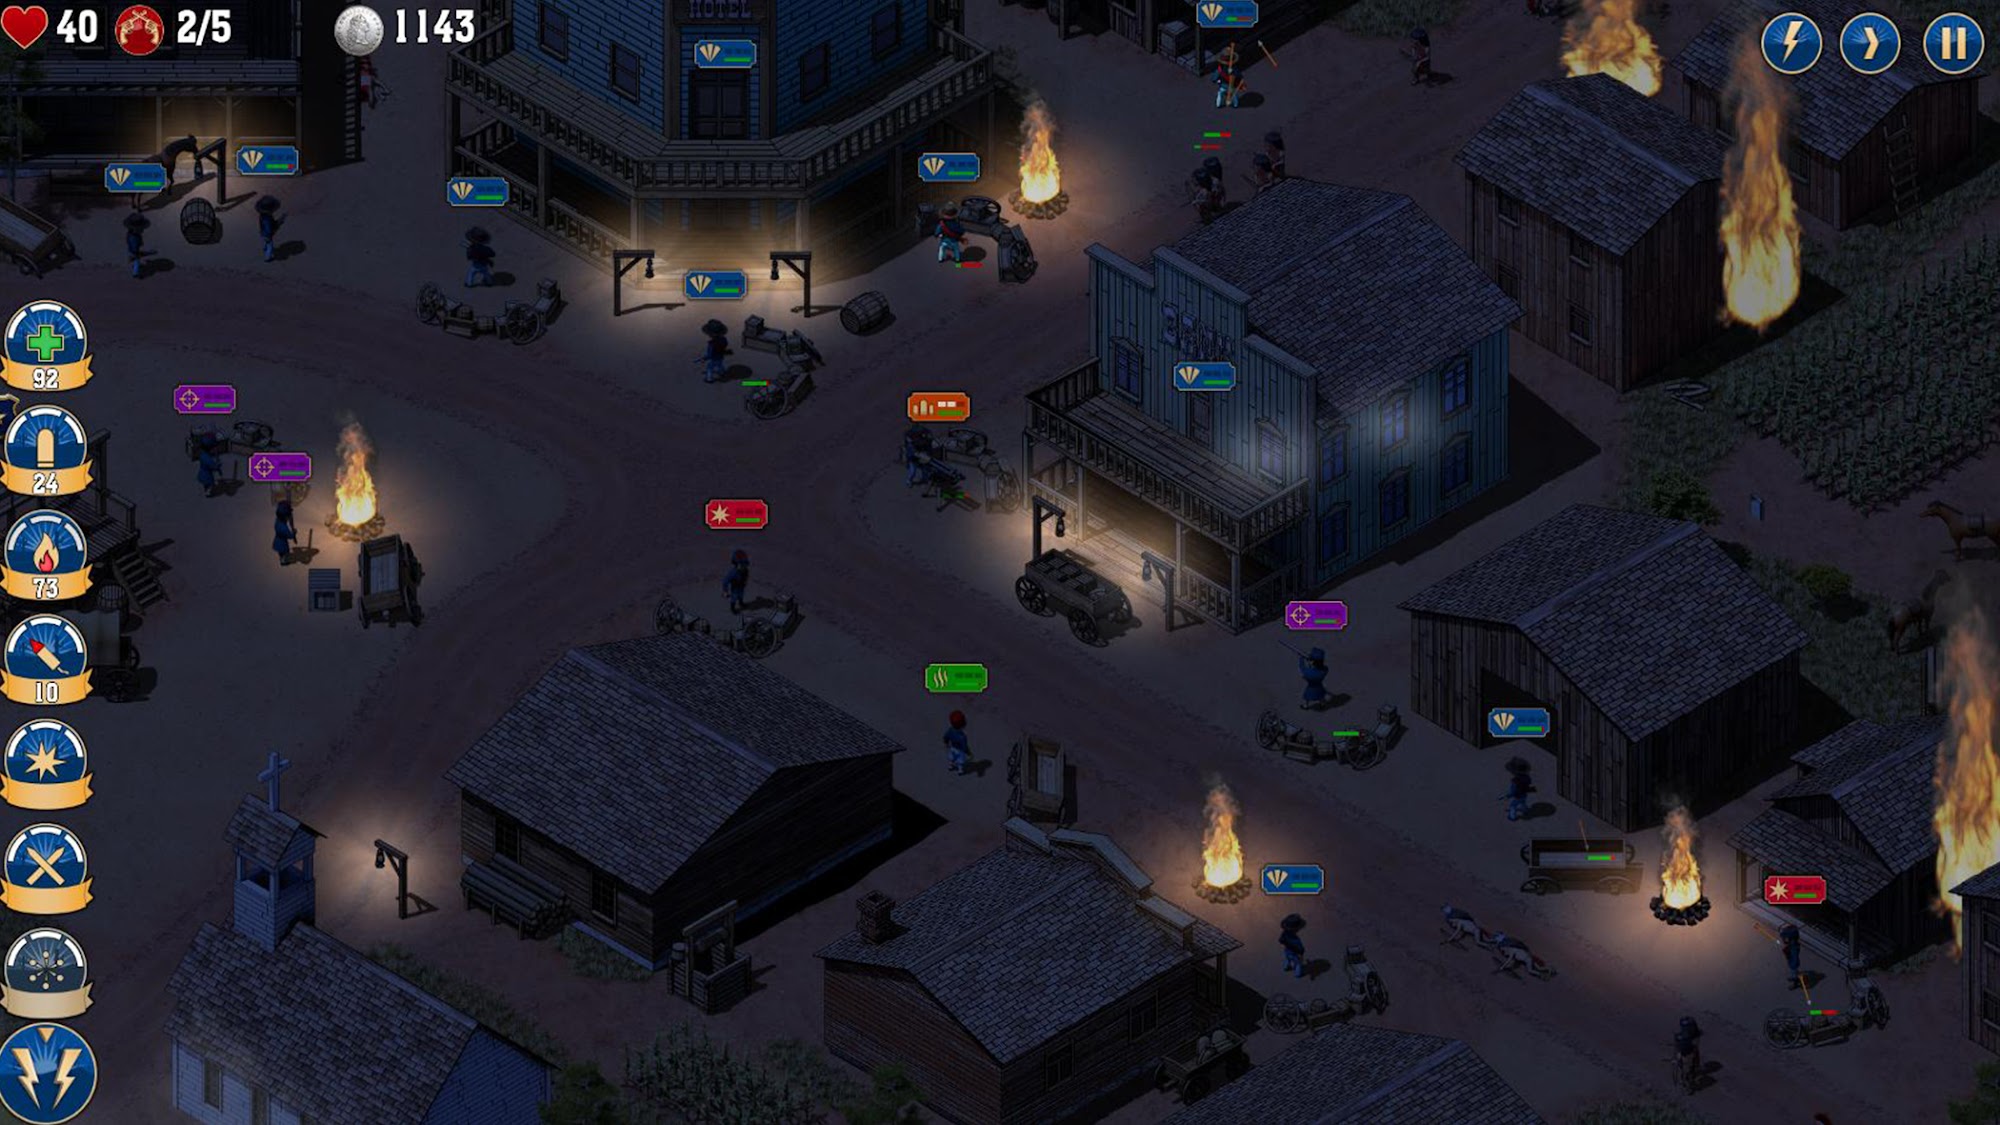 Lawless West - Android game screenshots.